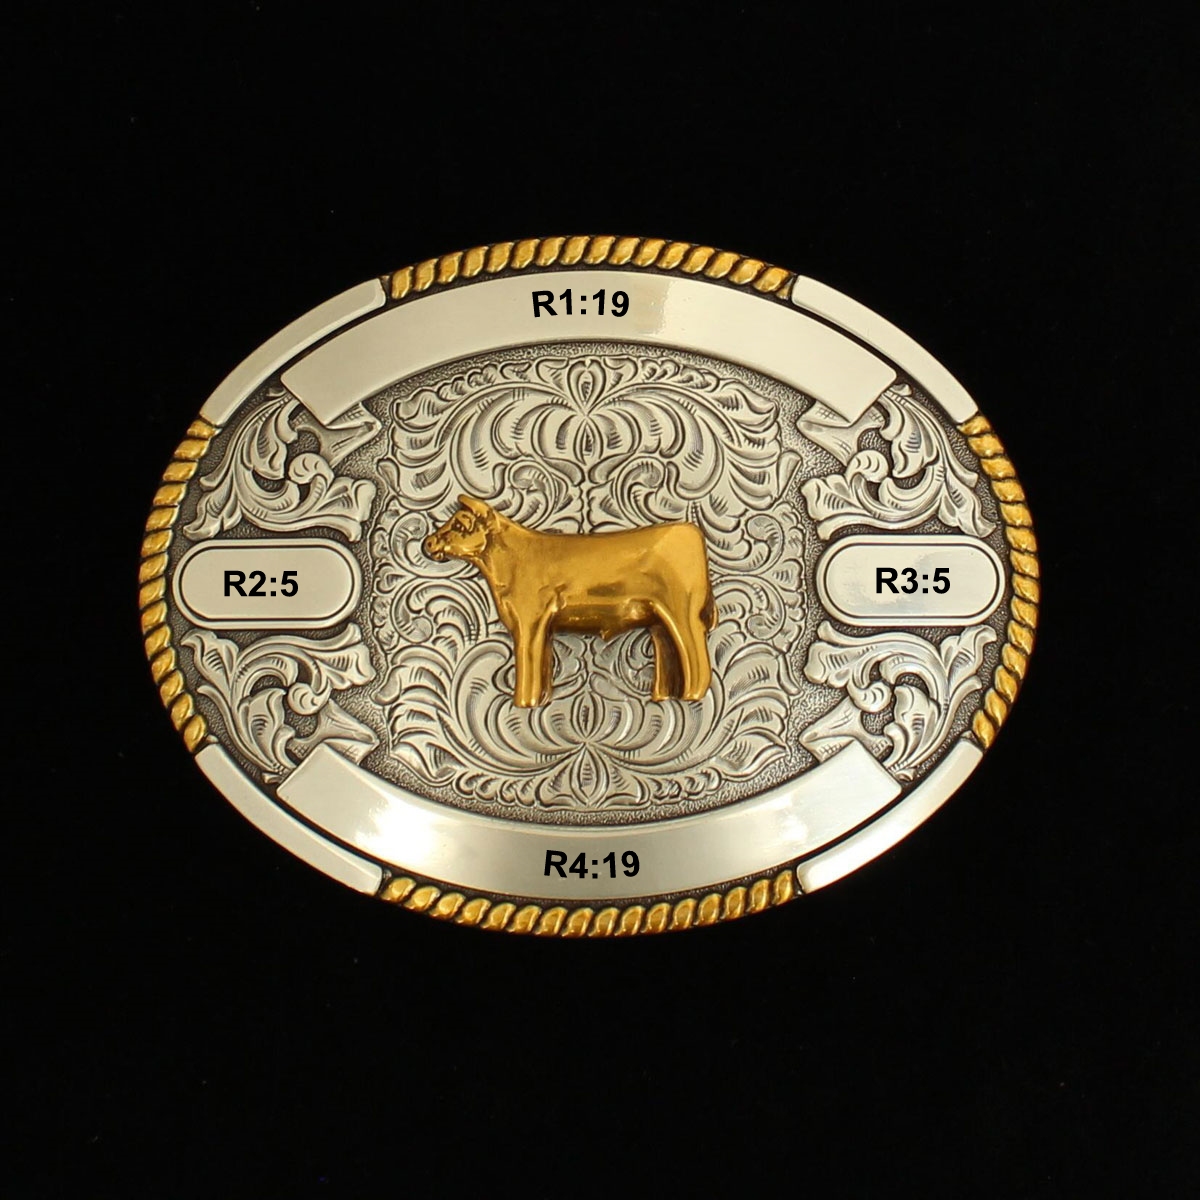 MF-38660 Trophy Buckle Oval Show Cow 4 Ribbons 3-1/2x4-1/2